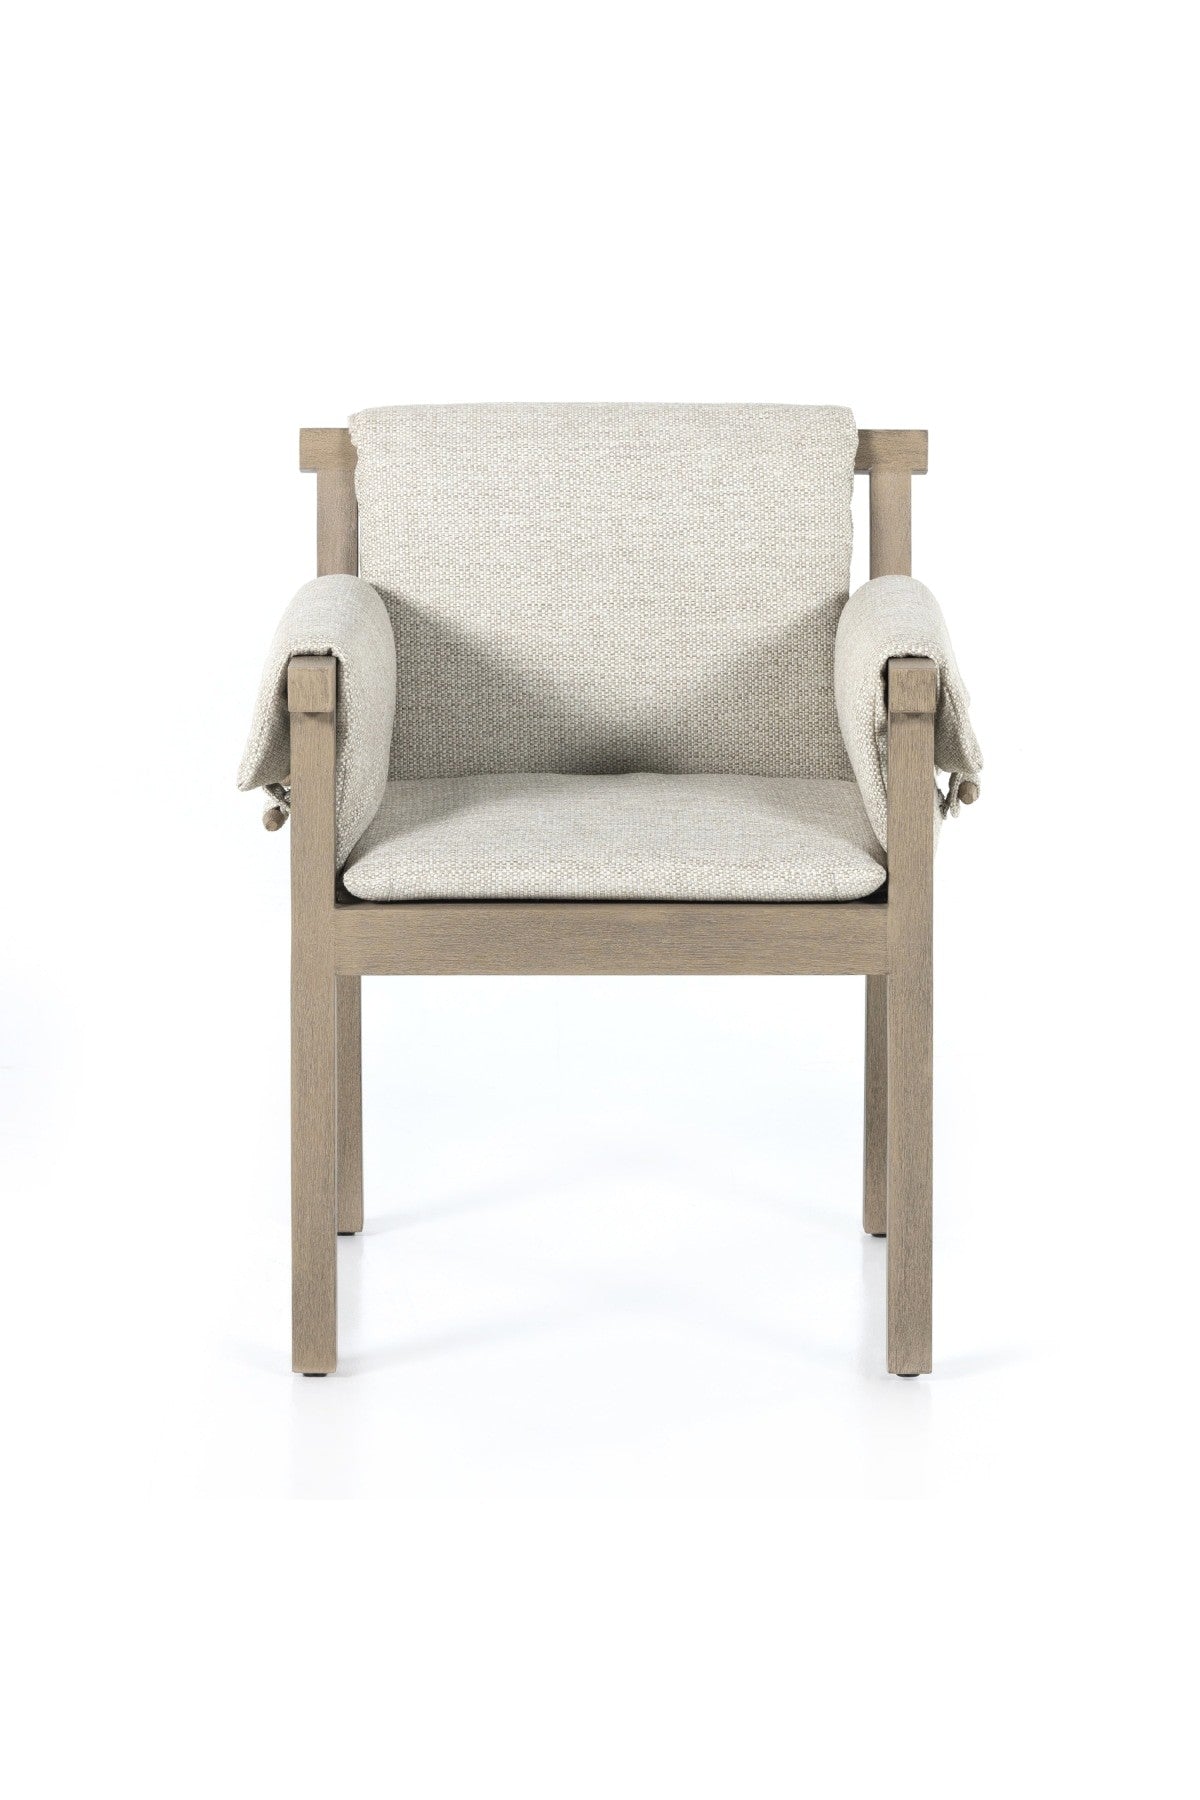 Galloway Outdoor Dining Chair